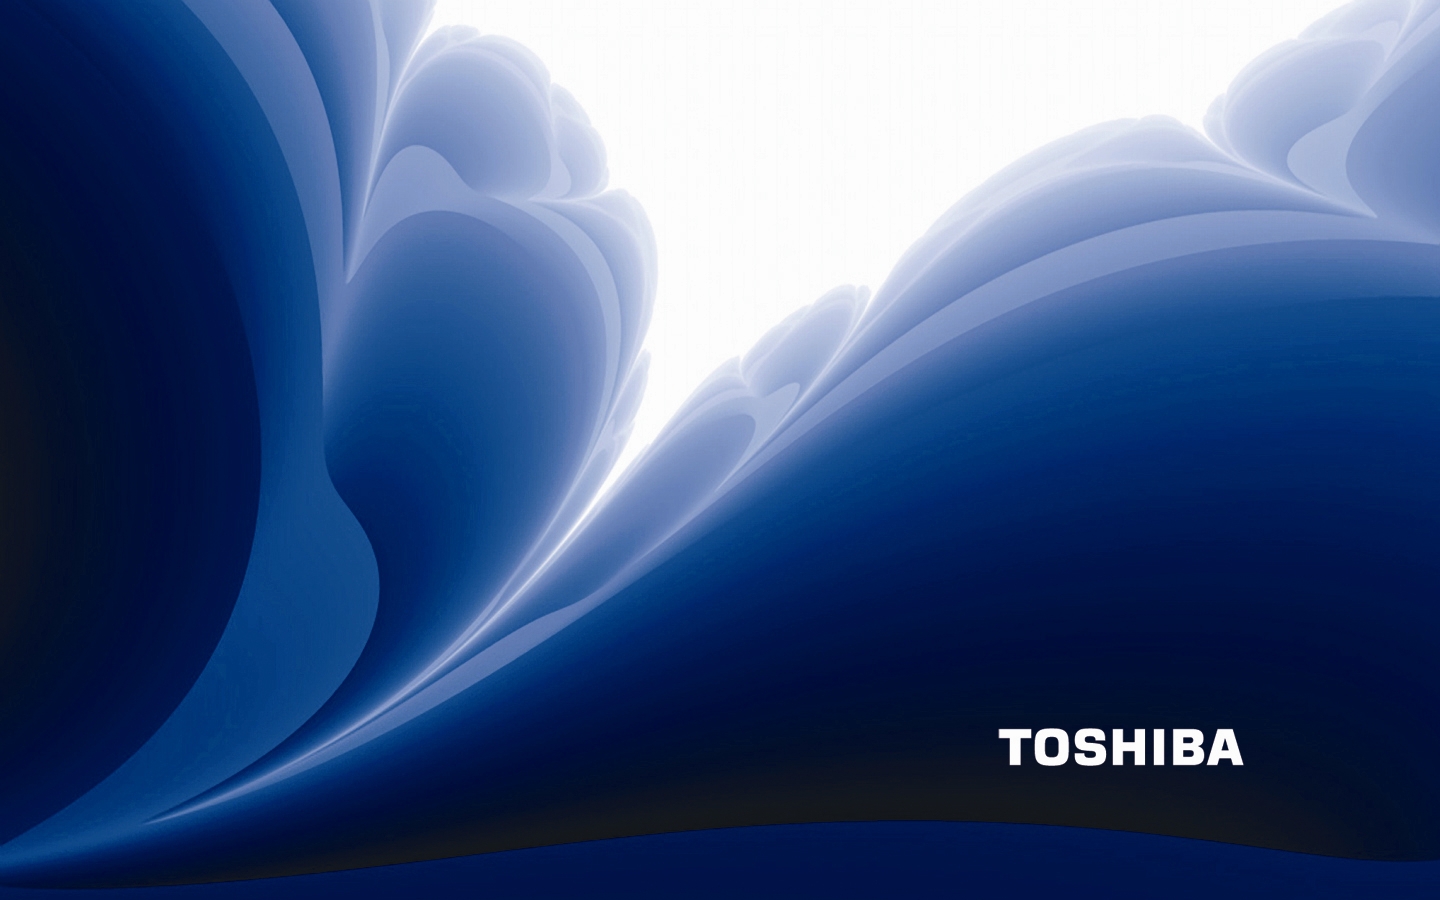 Toshiba Laptop Wallpaper Pack 1996  Toshiba  Free Download Borrow and  Streaming  Internet Archive